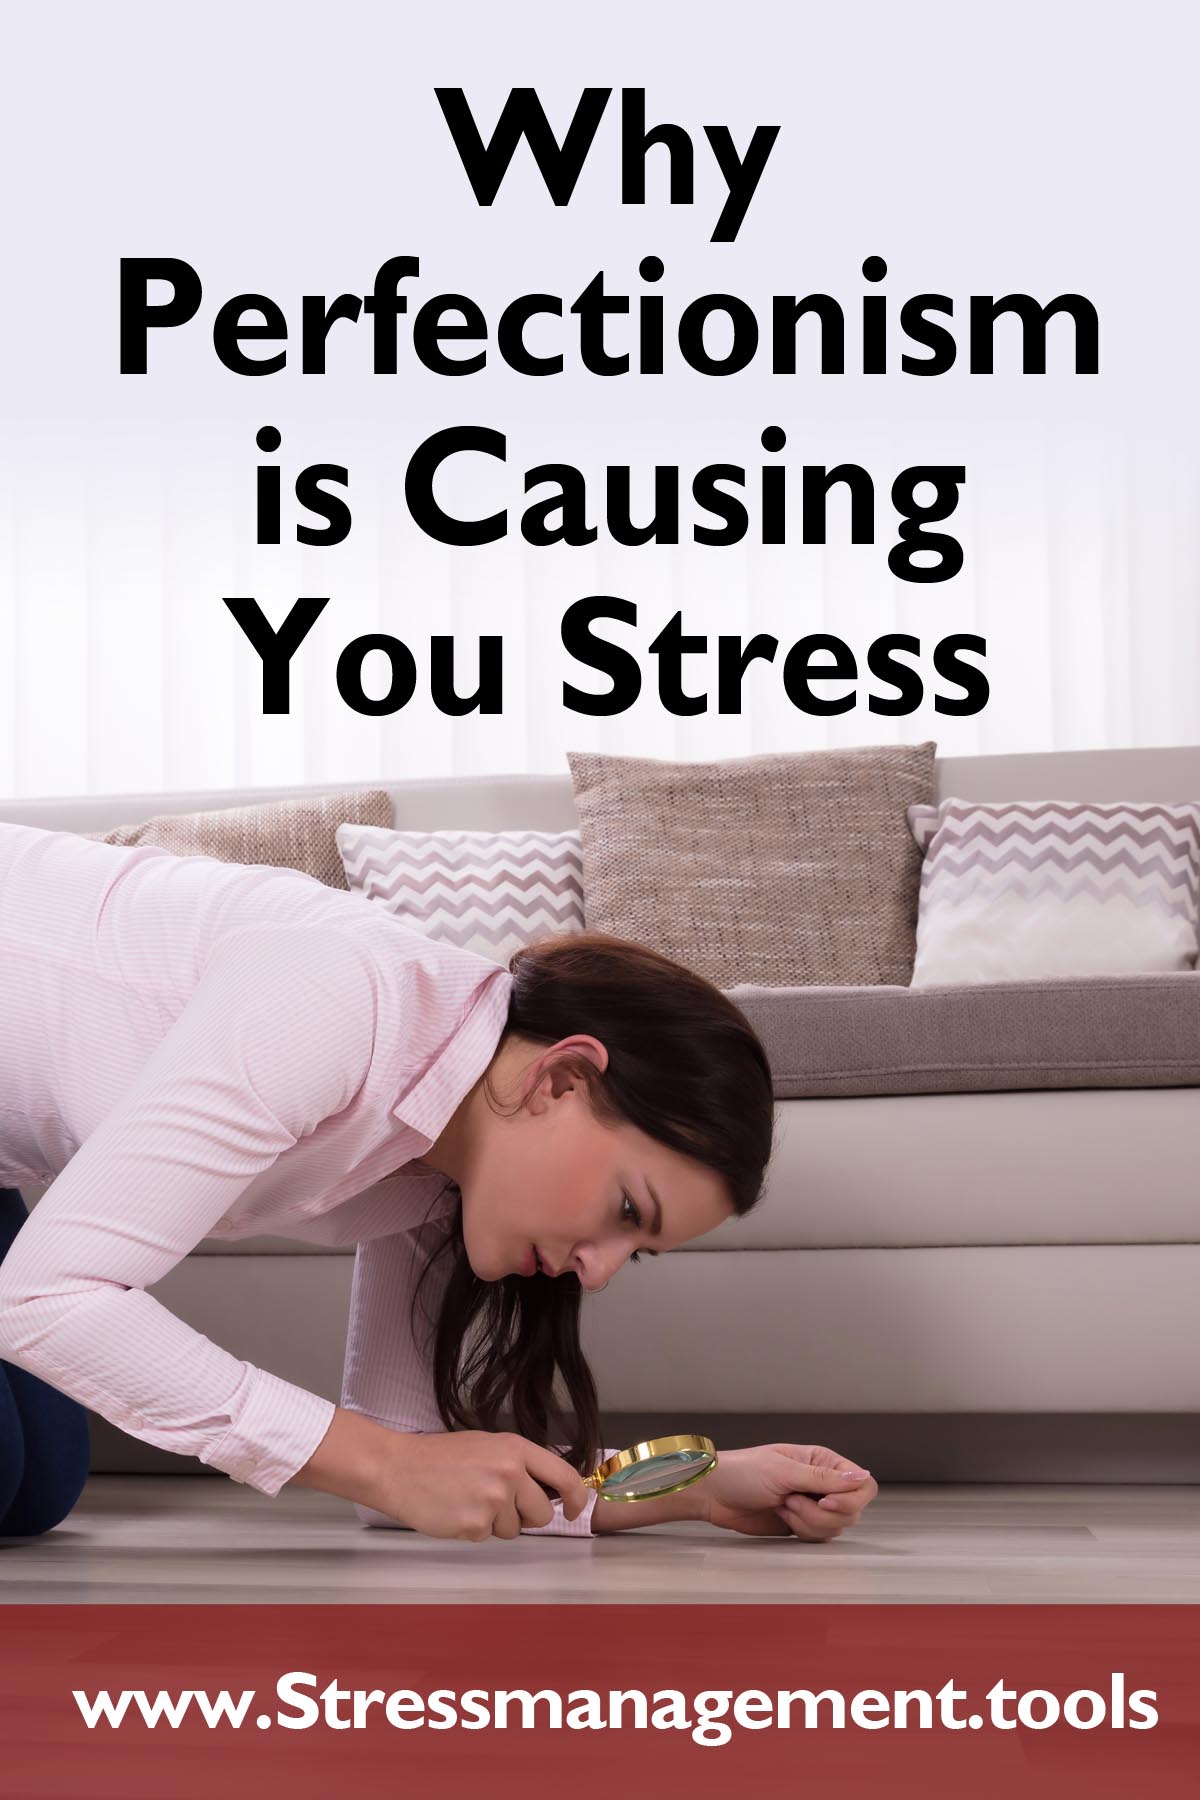 Why Perfectionism is Causing You Stress